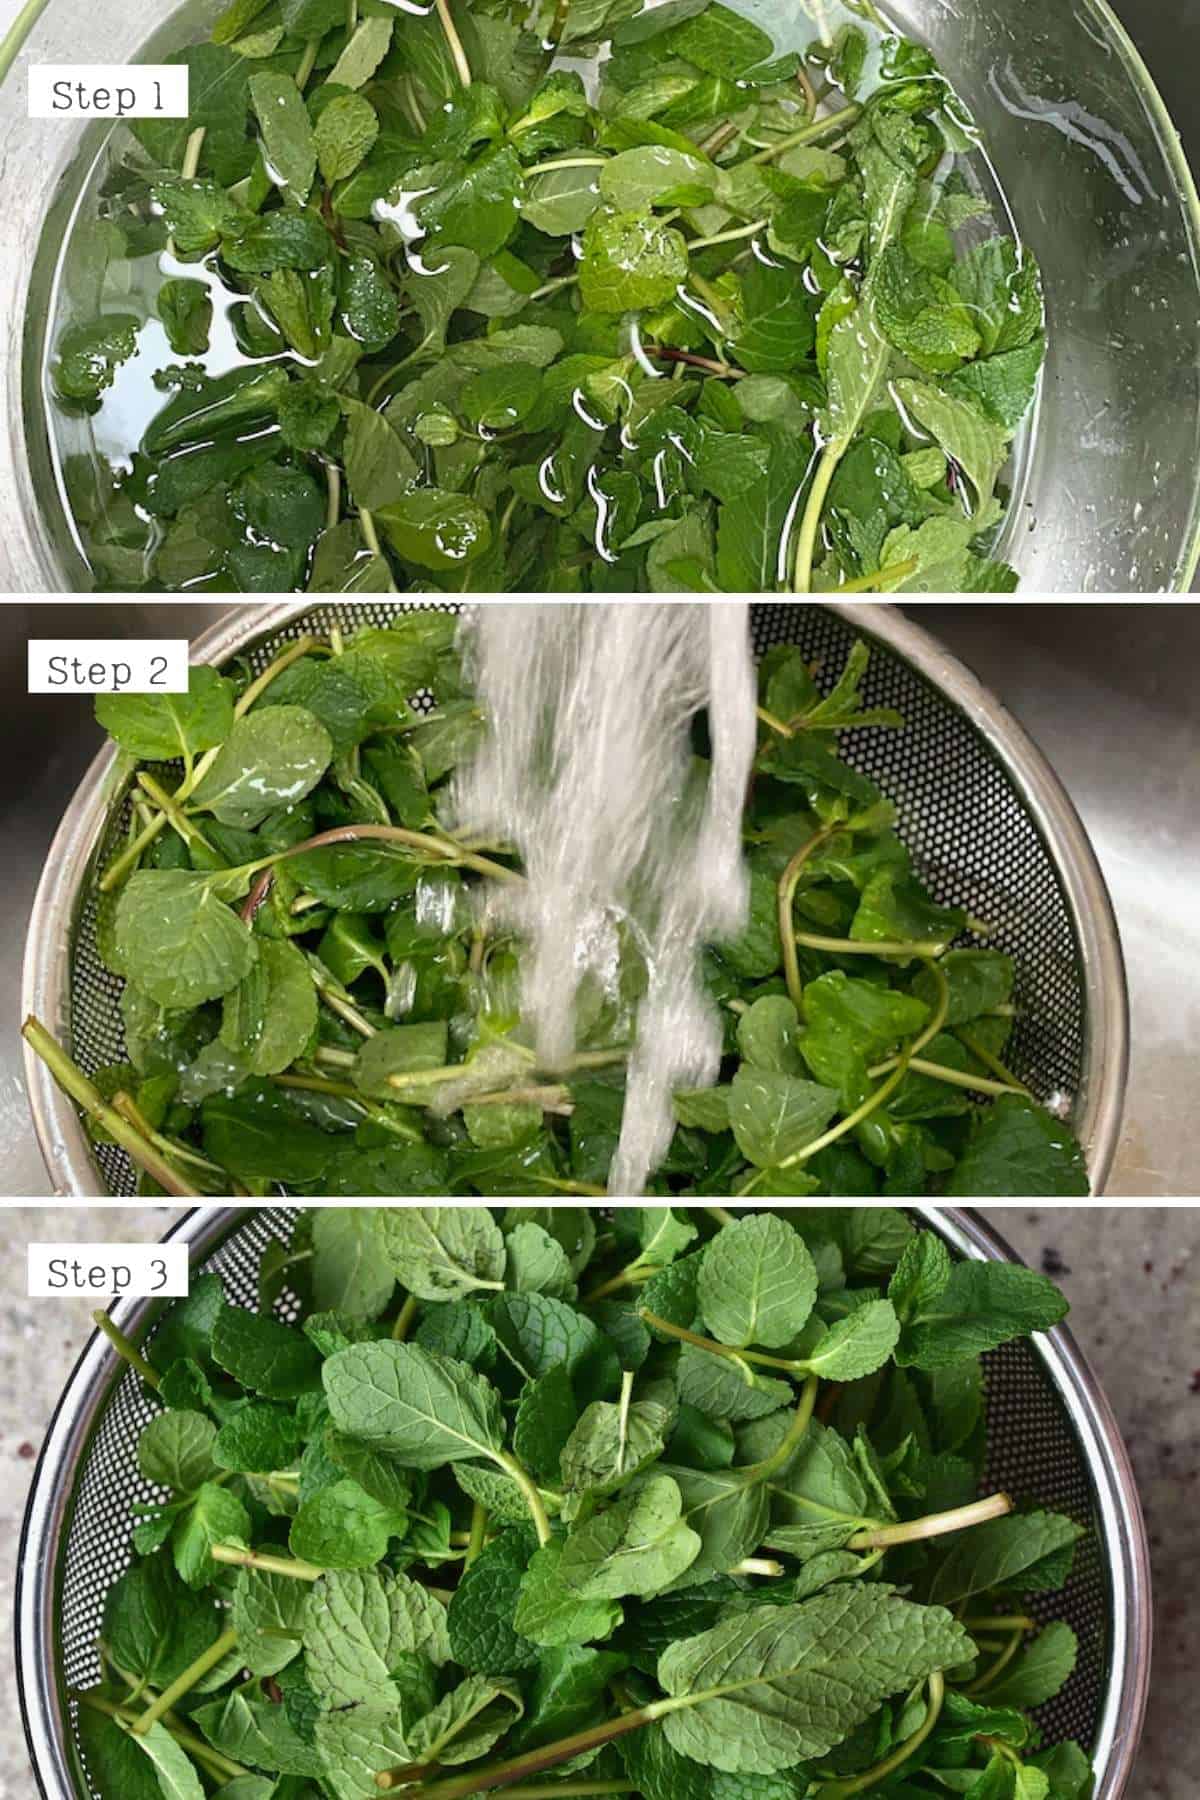 Steps for washing mint